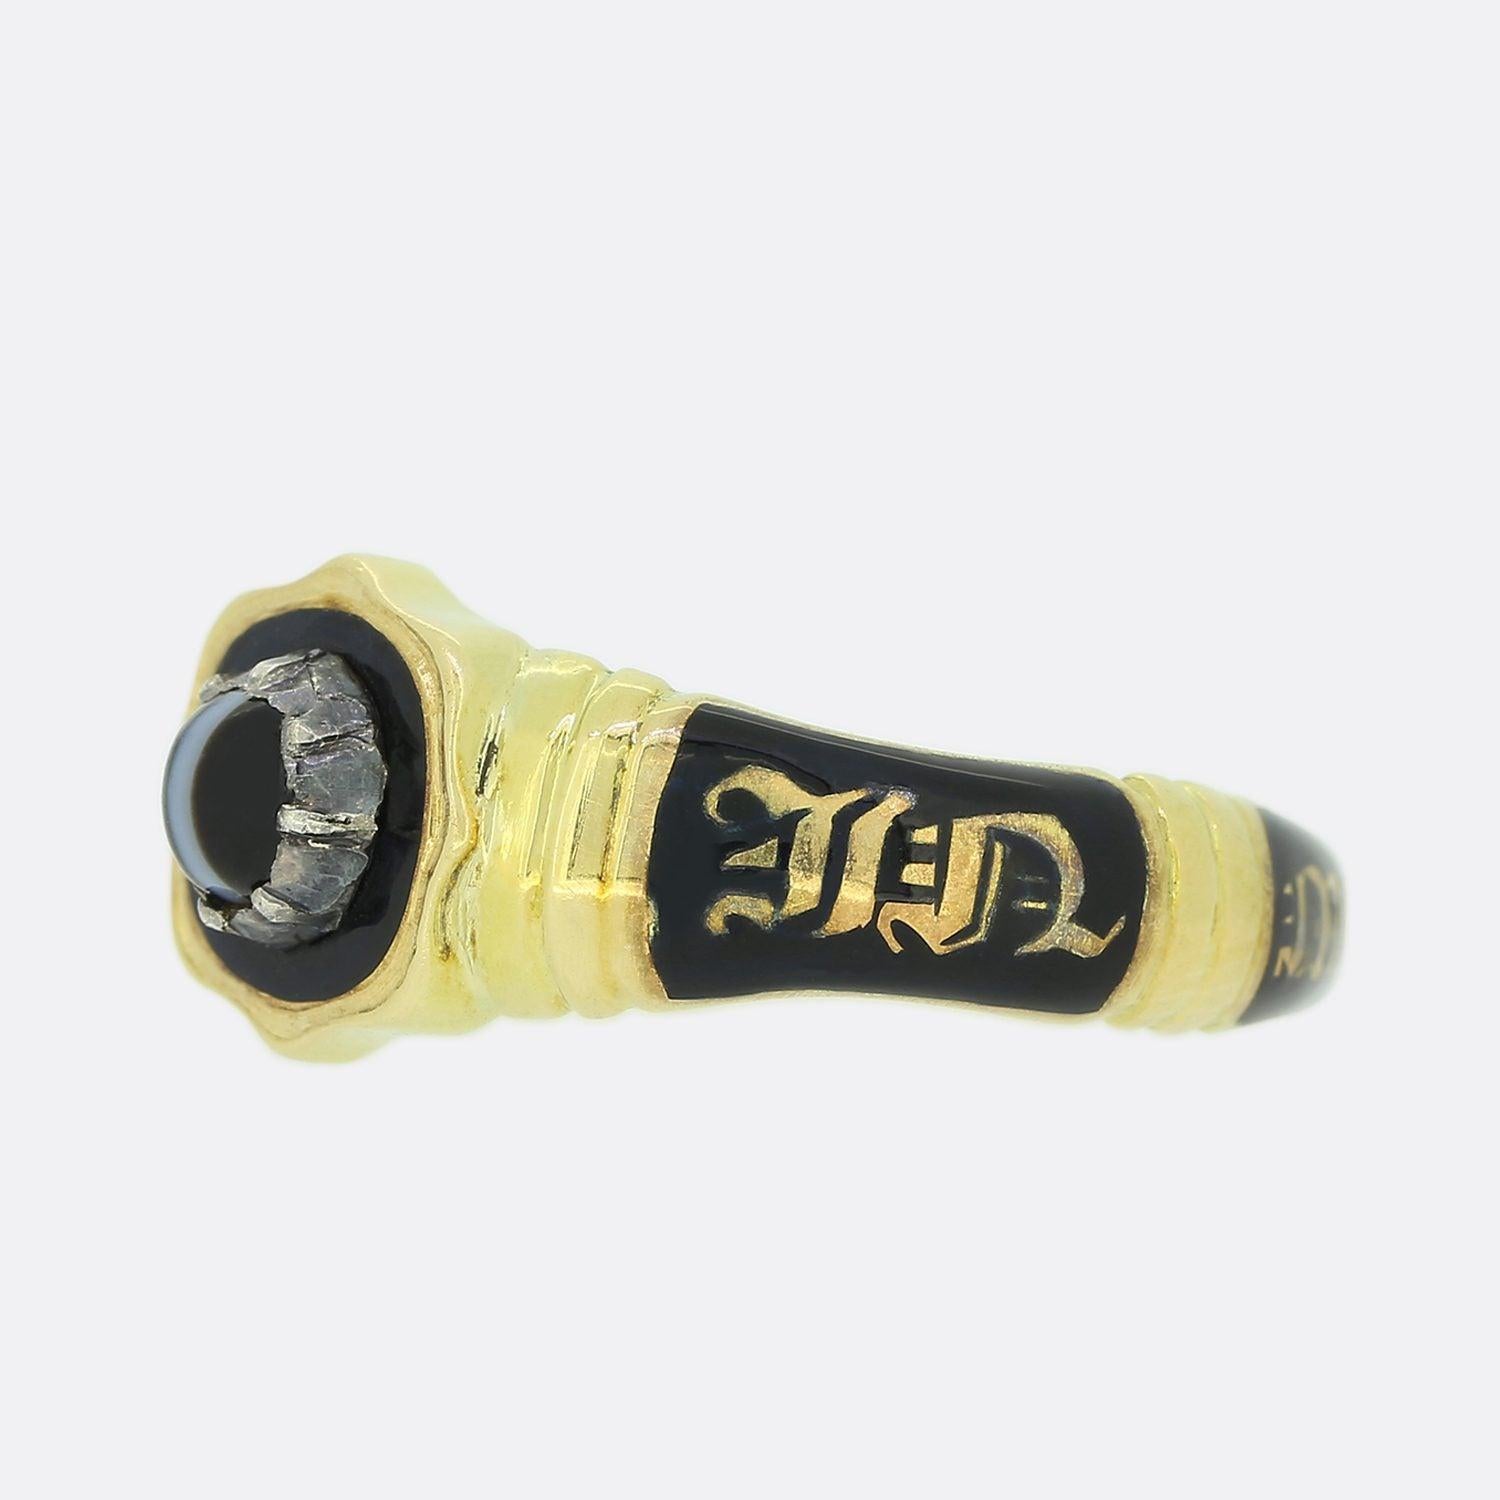 This is a wonderful 18ct yellow gold mourning ring from the early Victorian era. The ring has been set with a central cabochon black cats eye tourmaline and the band of the ring features black enamel with the words 'In Memory Of'. The inside of the